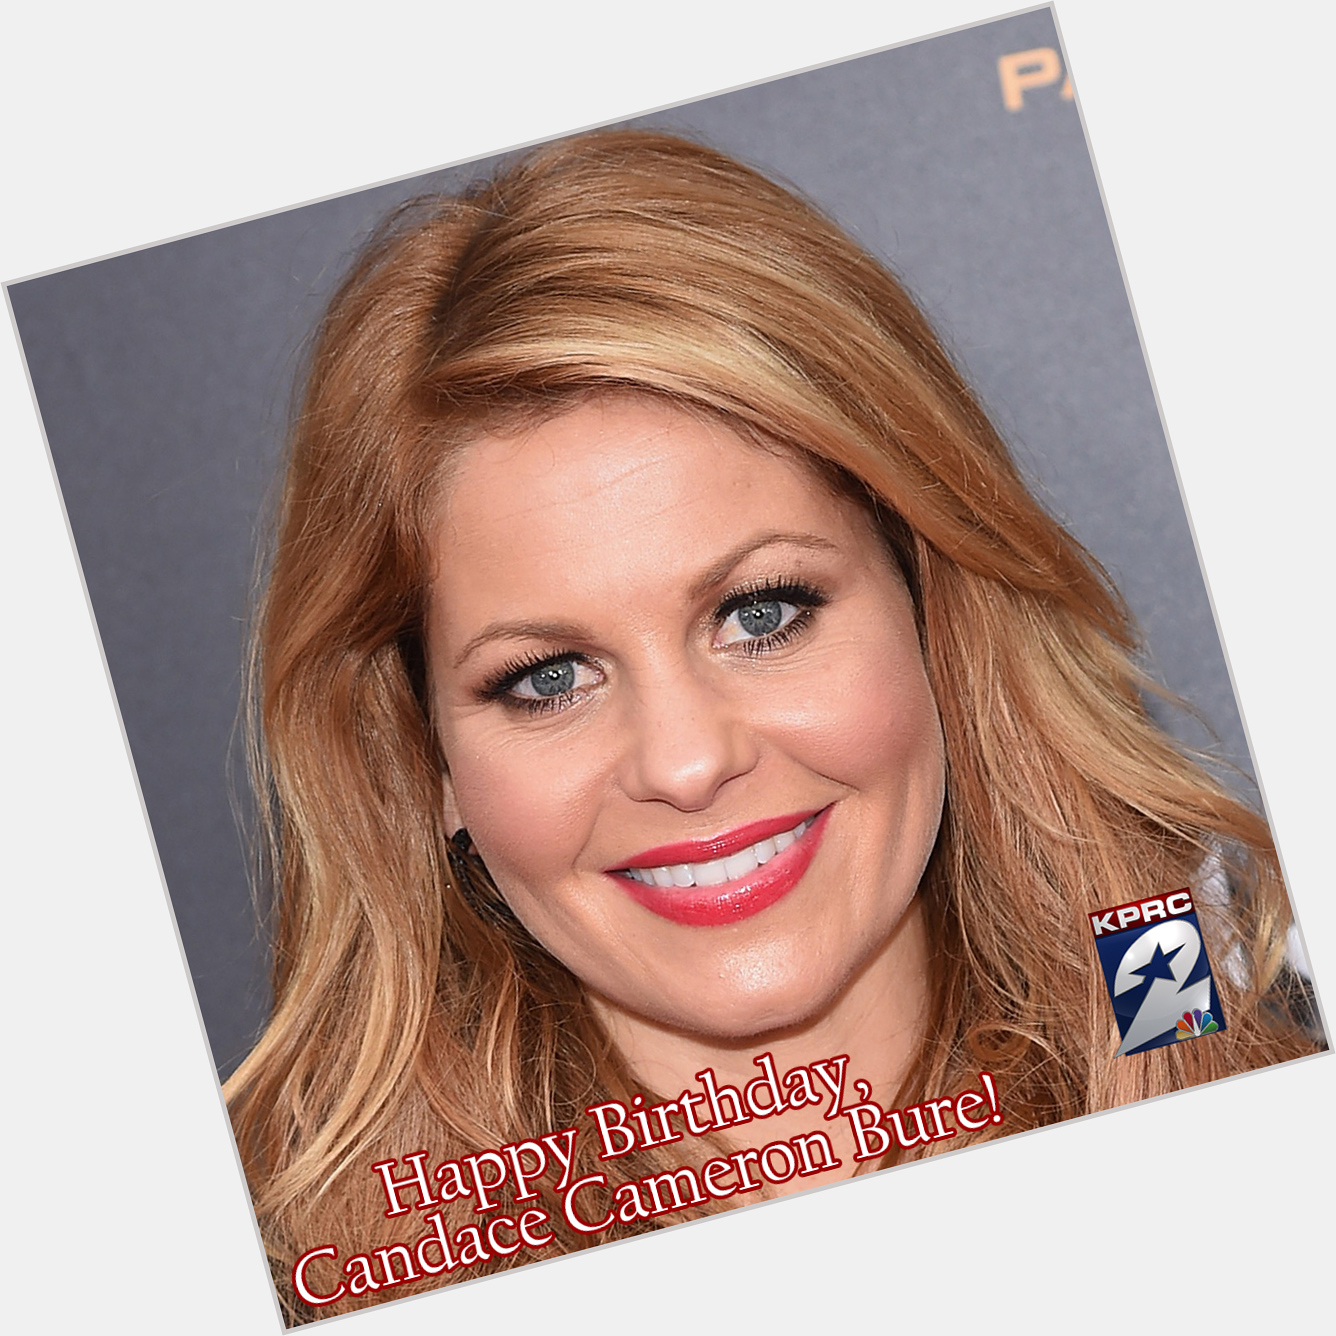 Happy Birthday, Candace Cameron Bure! The actress is 45 years old today. 